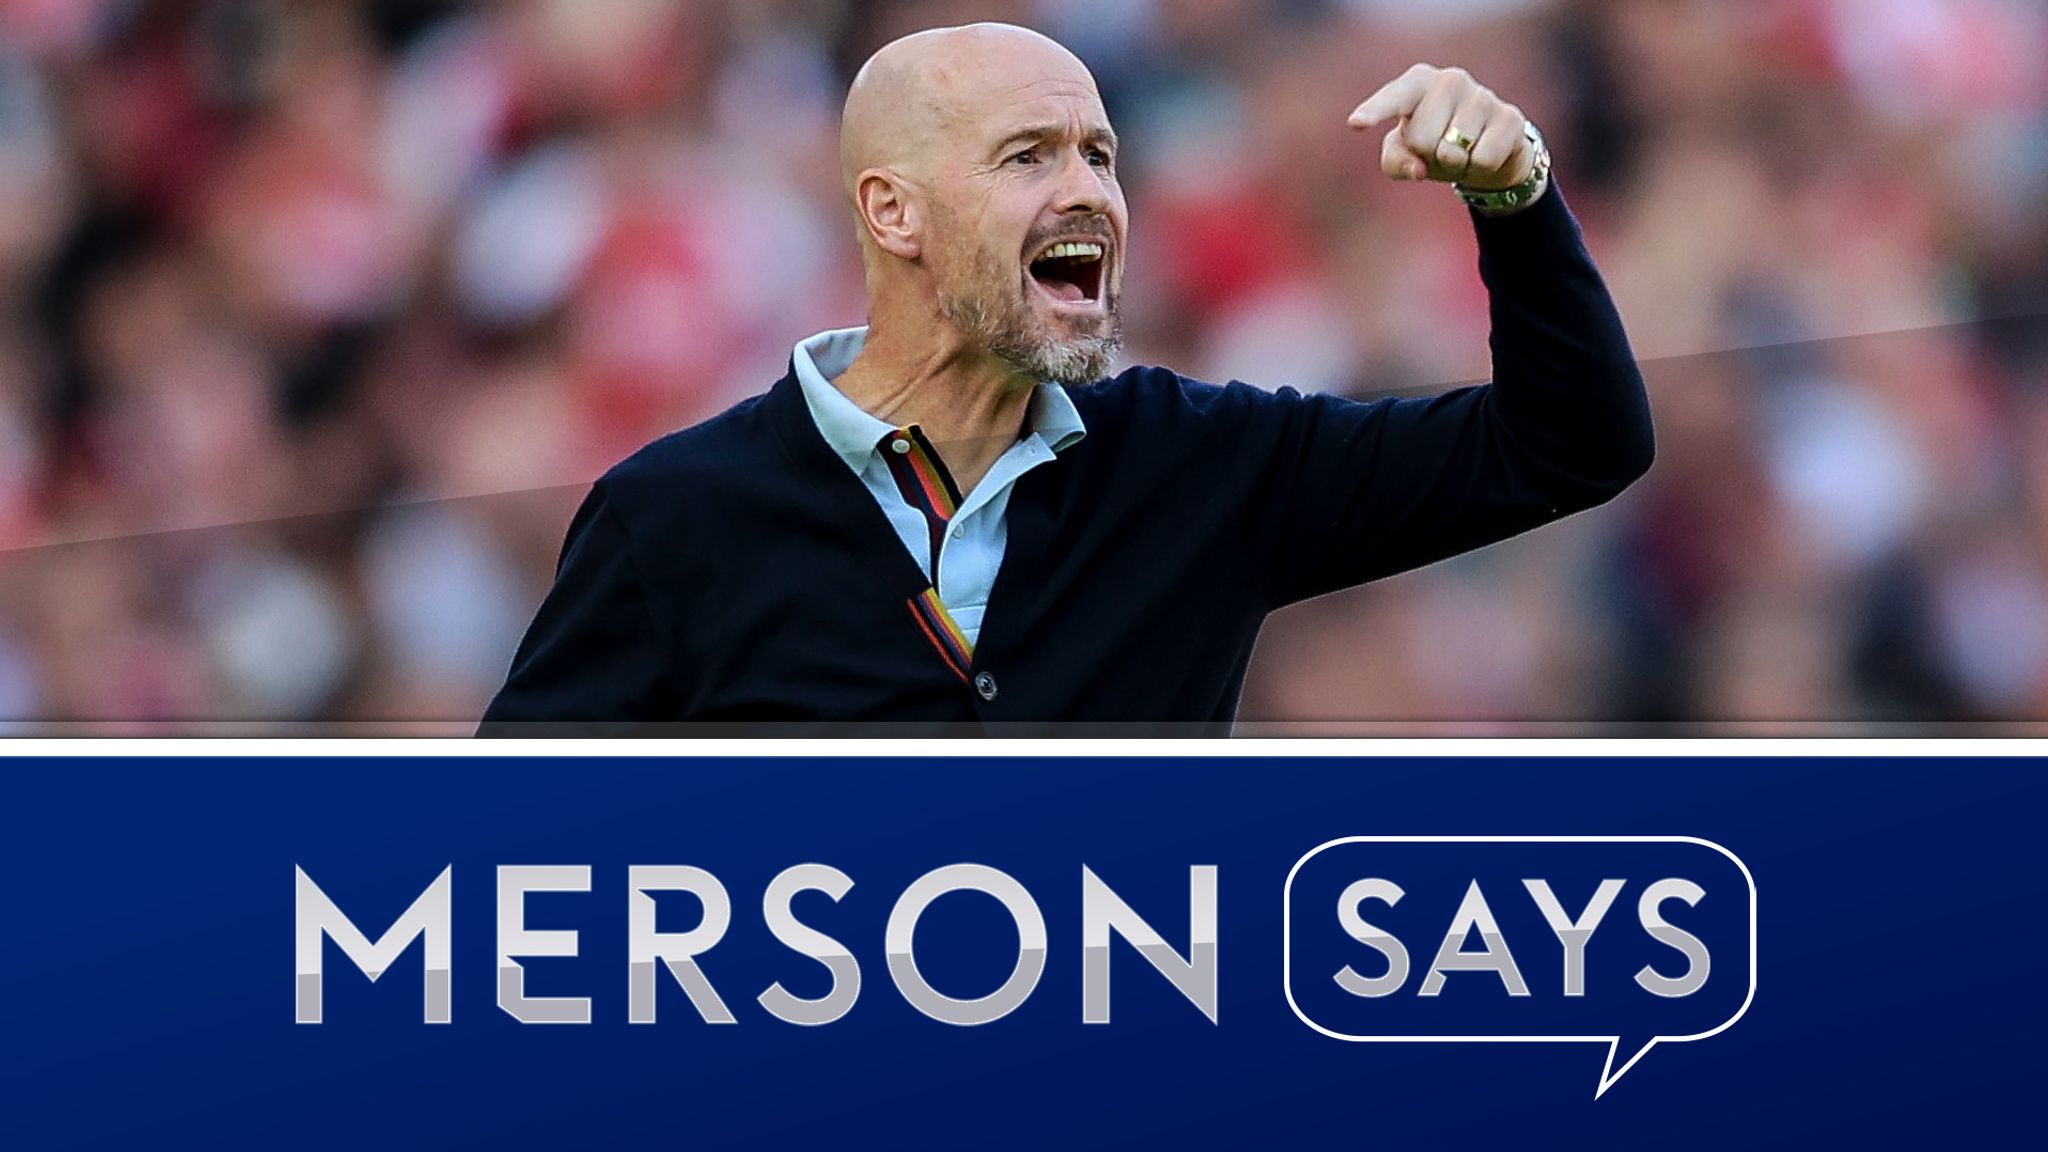 Paul Merson says: Worrying times as Erik ten Hag and Man Utd are under pressure